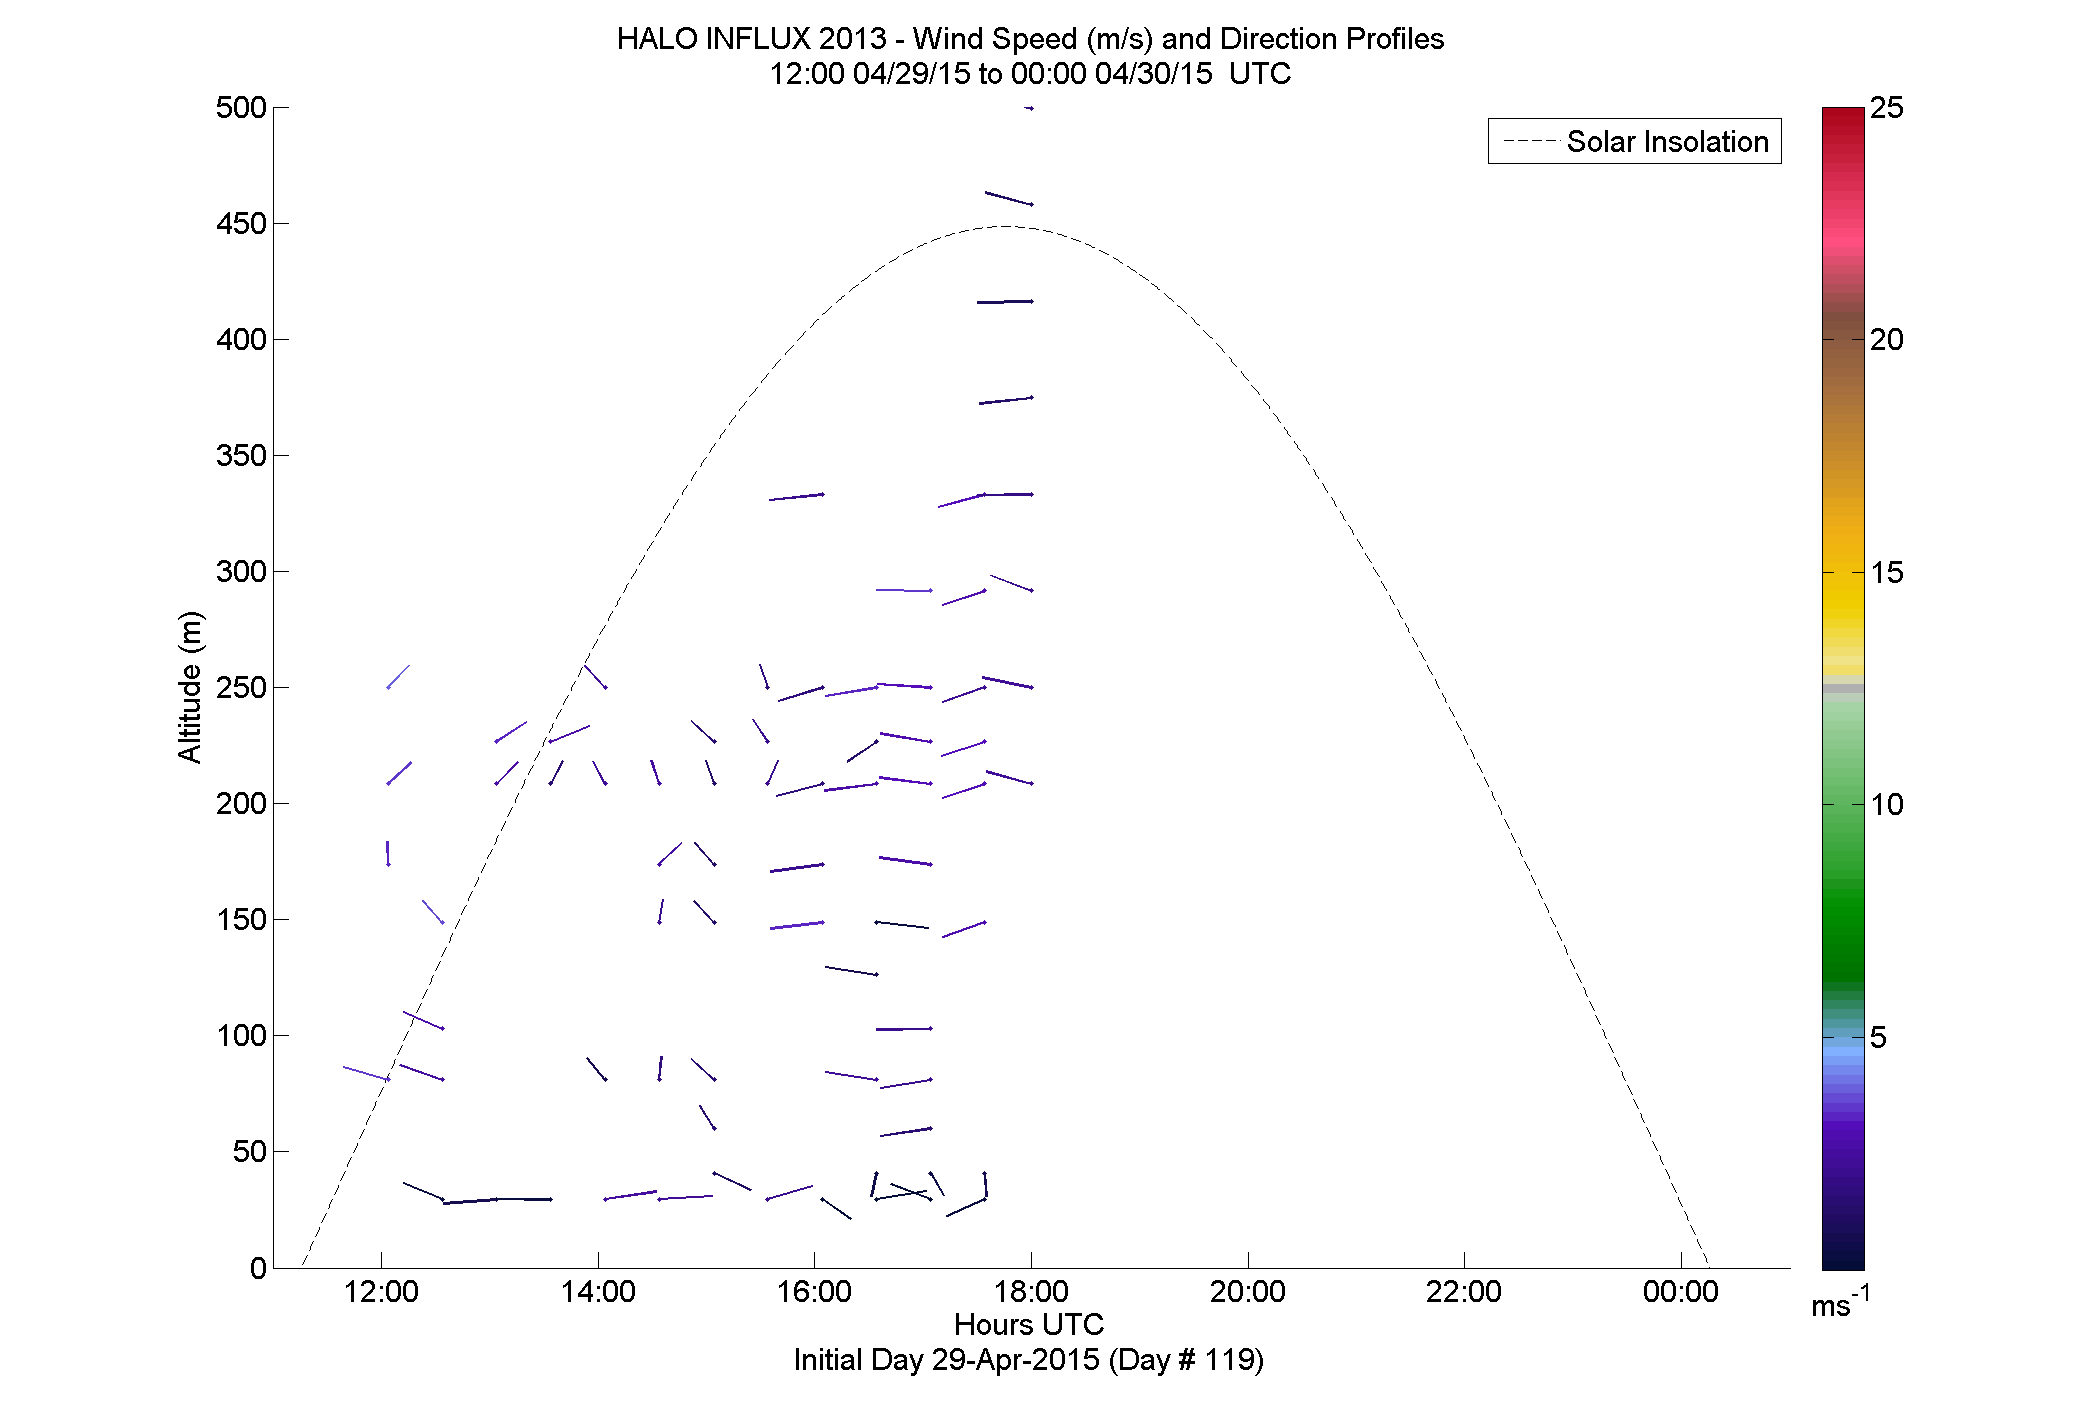 HALO speed and direction profile - April 29 pm